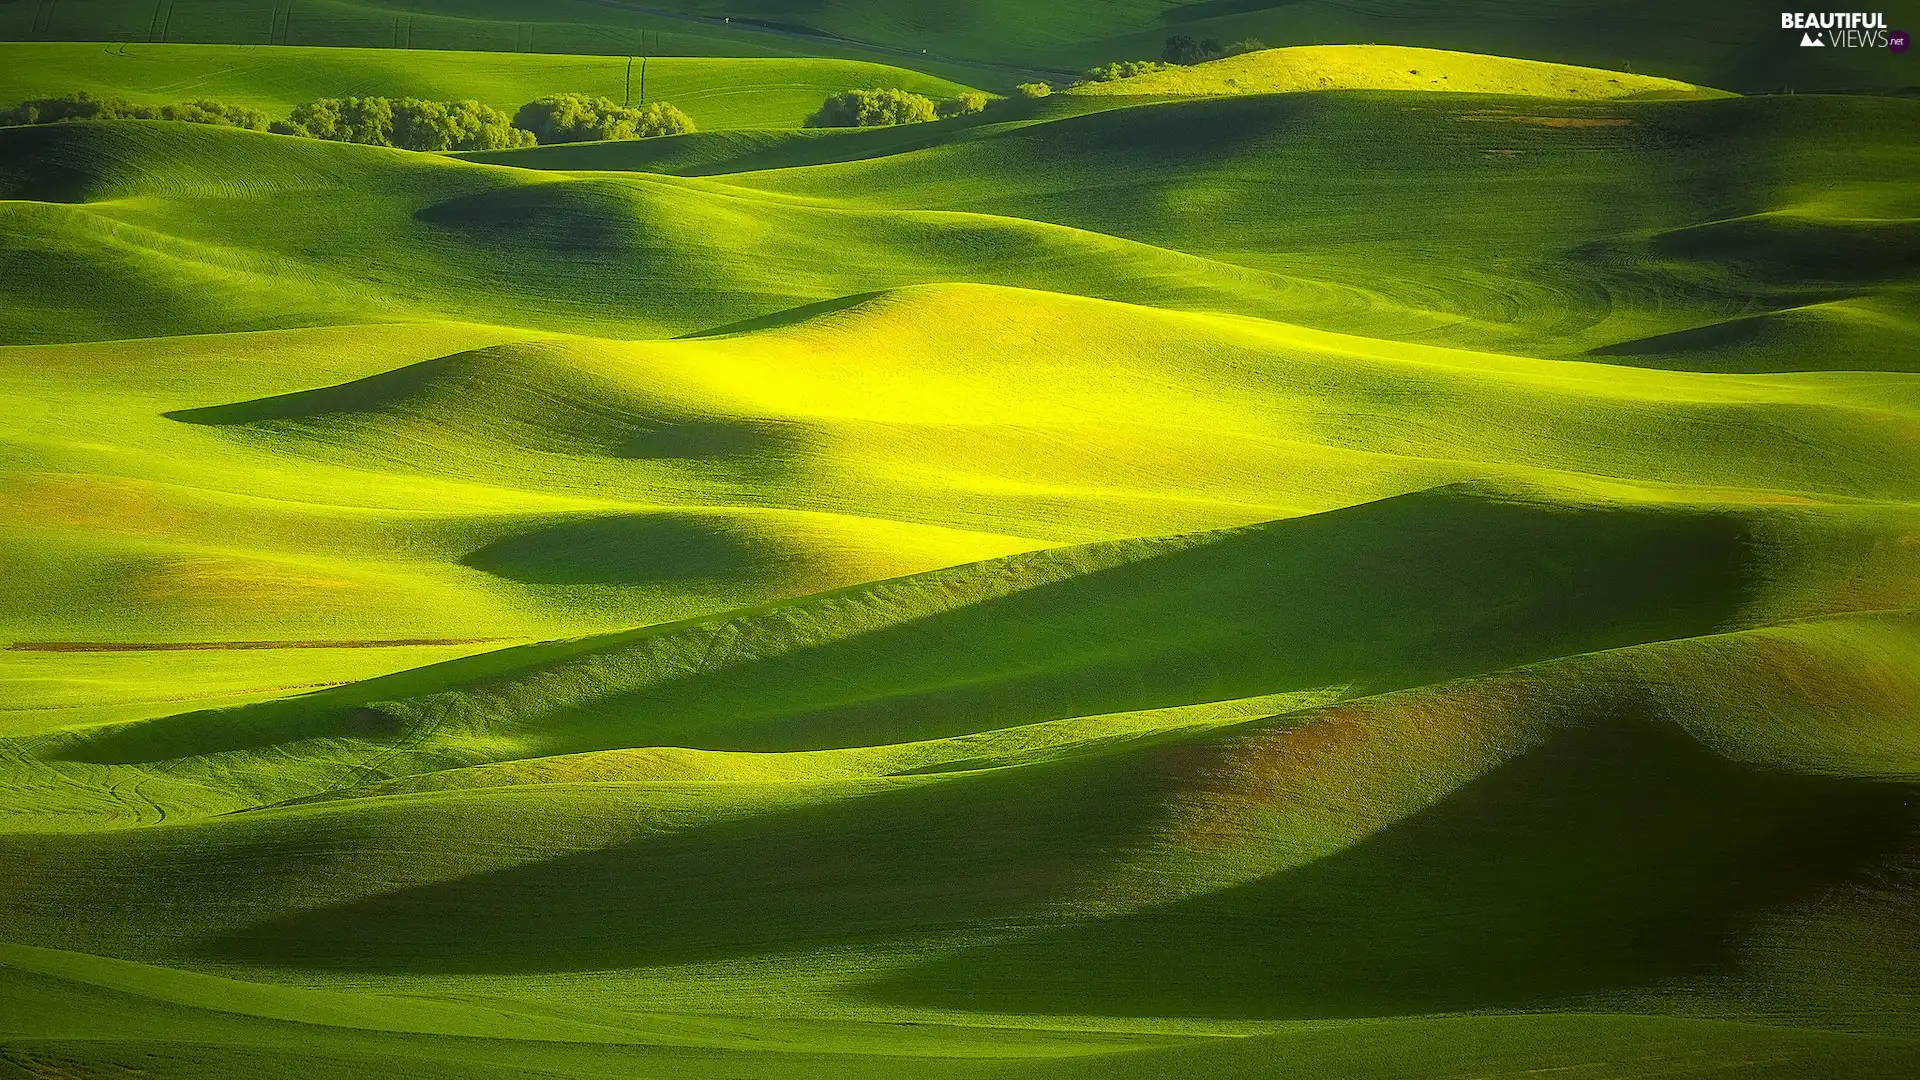 trees, viewes, The United States, The Hills, Washington State, medows, field, Palouse